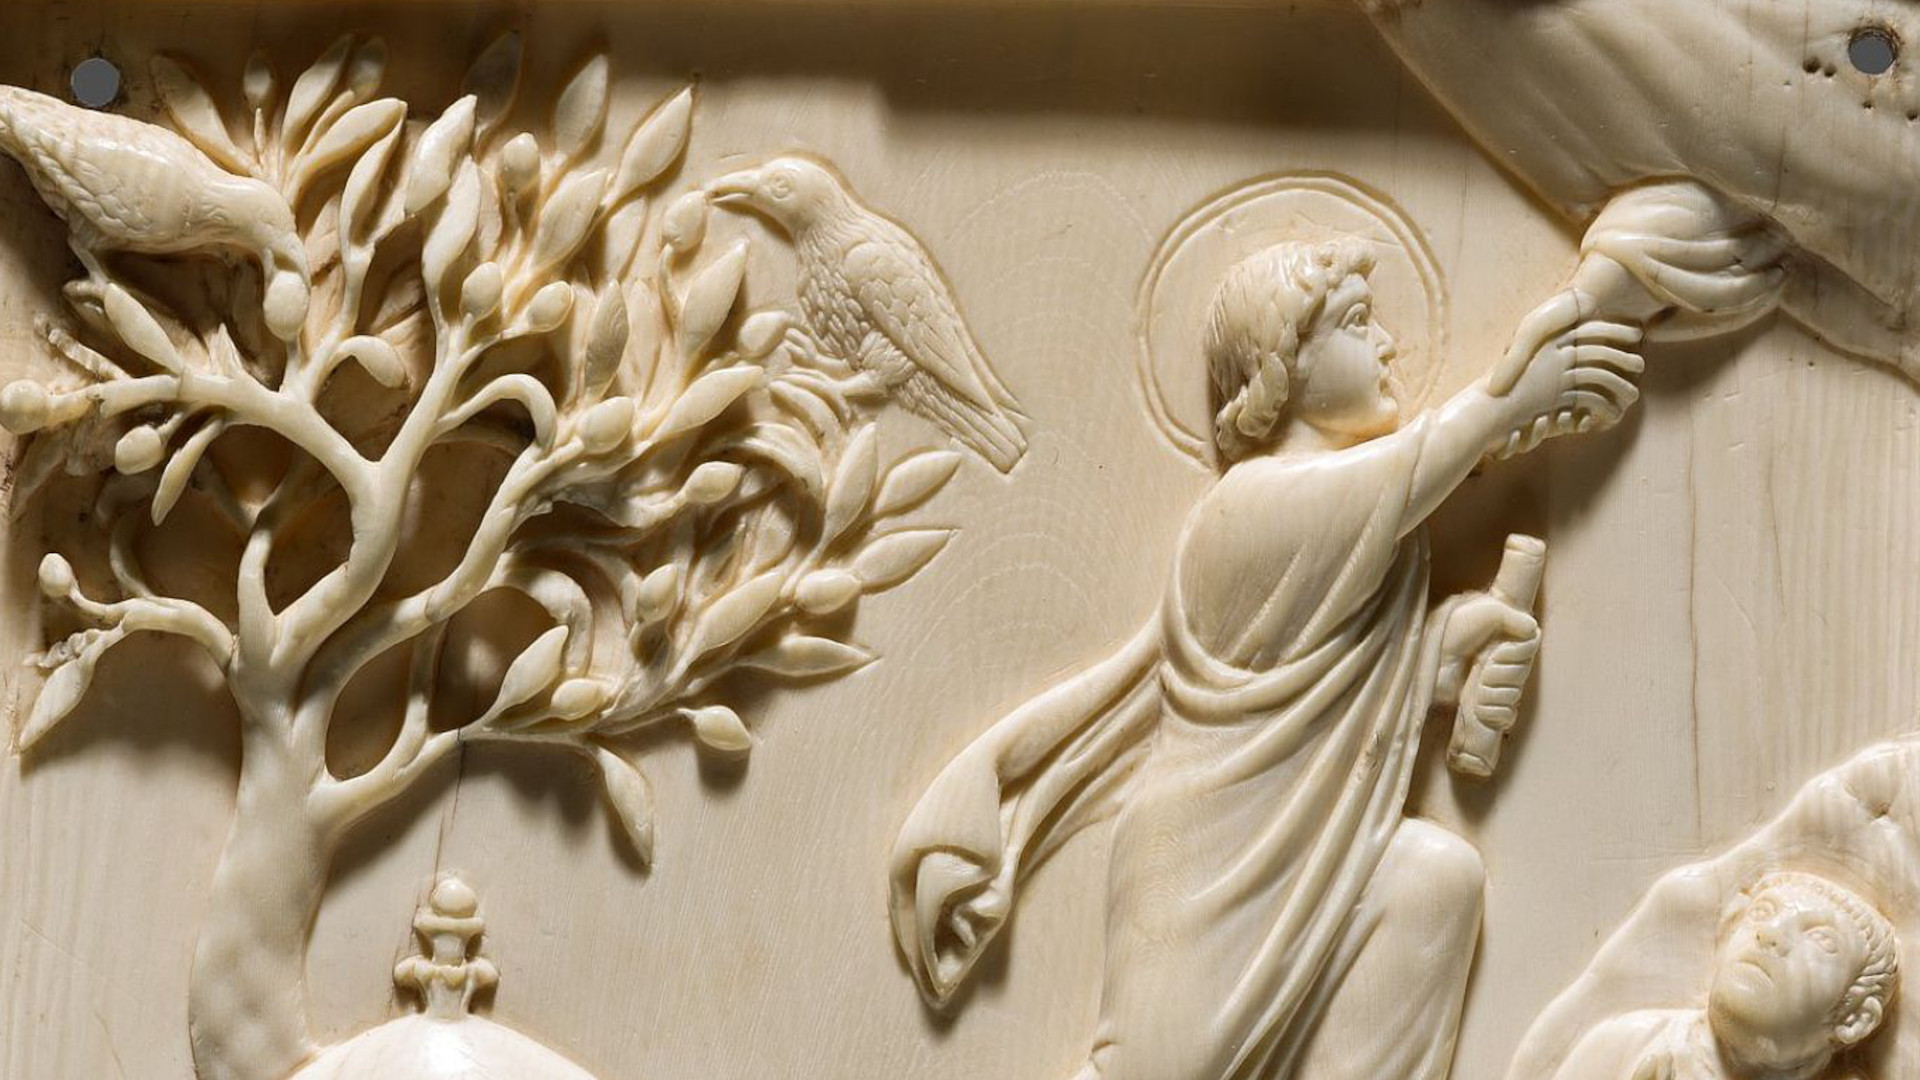 Detail from “Resurrection and Ascension of Christ,” also known as the Reider-Panel, an ivory relief from c. 400 A.D. found in Rome or Milan. Image from the Bayerisches Nationalmuseum, used under CC BY-NC-ND 4.0 license.